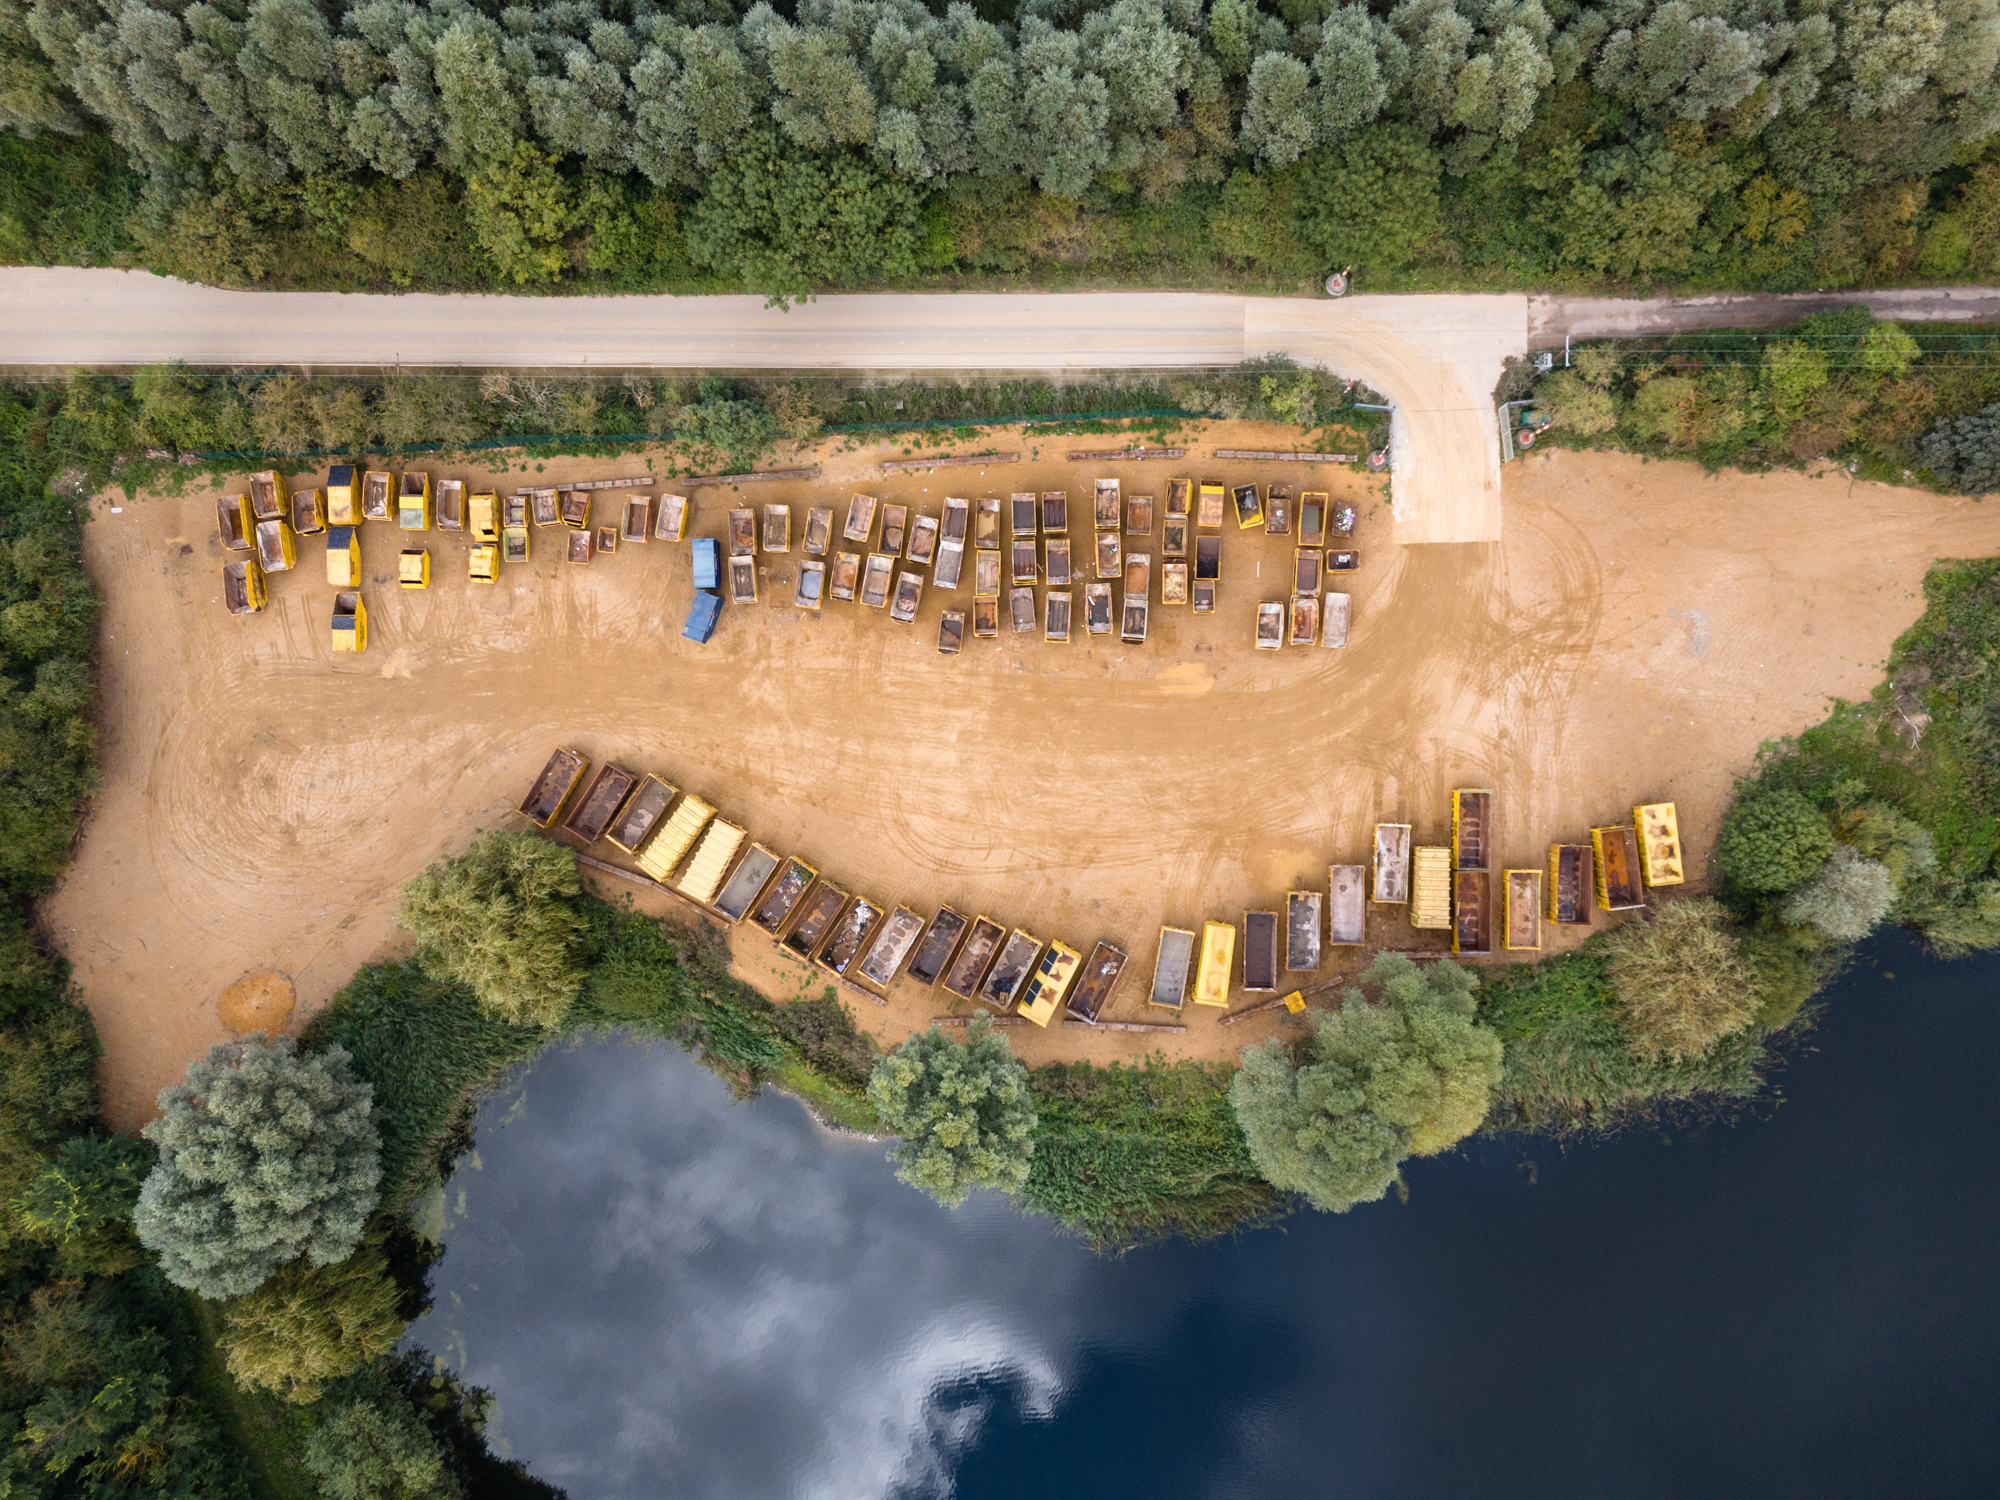 aerial view of a dirt lot below an adjacent road, neighbored by a thick row of tress above. Below the lot sits a body of water.  various yellow containers are parcked.